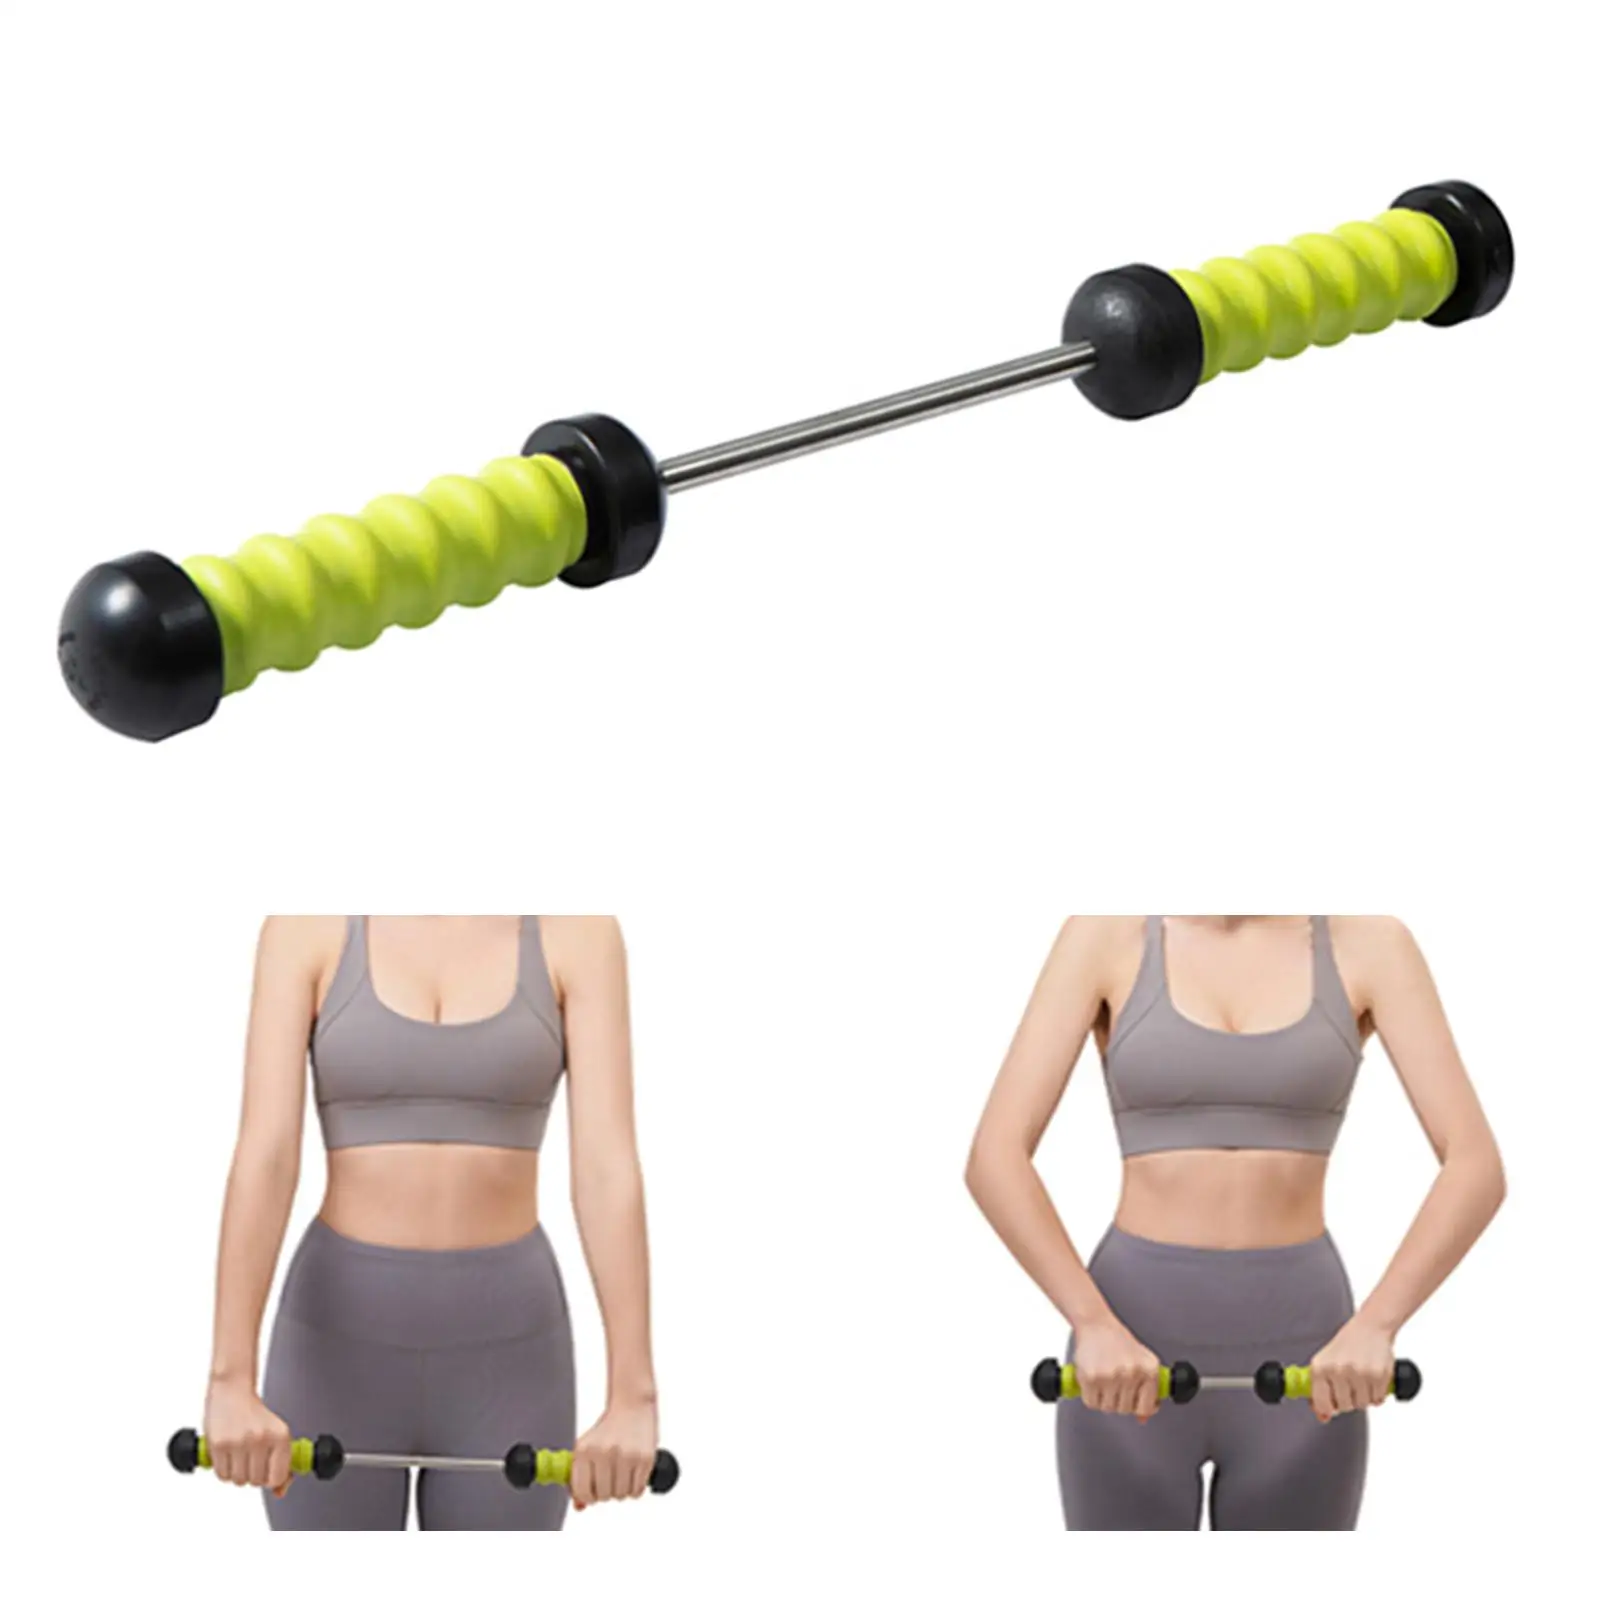 Arm Power Exerciser Pull Bar Heavy Duty Resistance Exercise System Bands for Muscle Builder Strengthener Adults